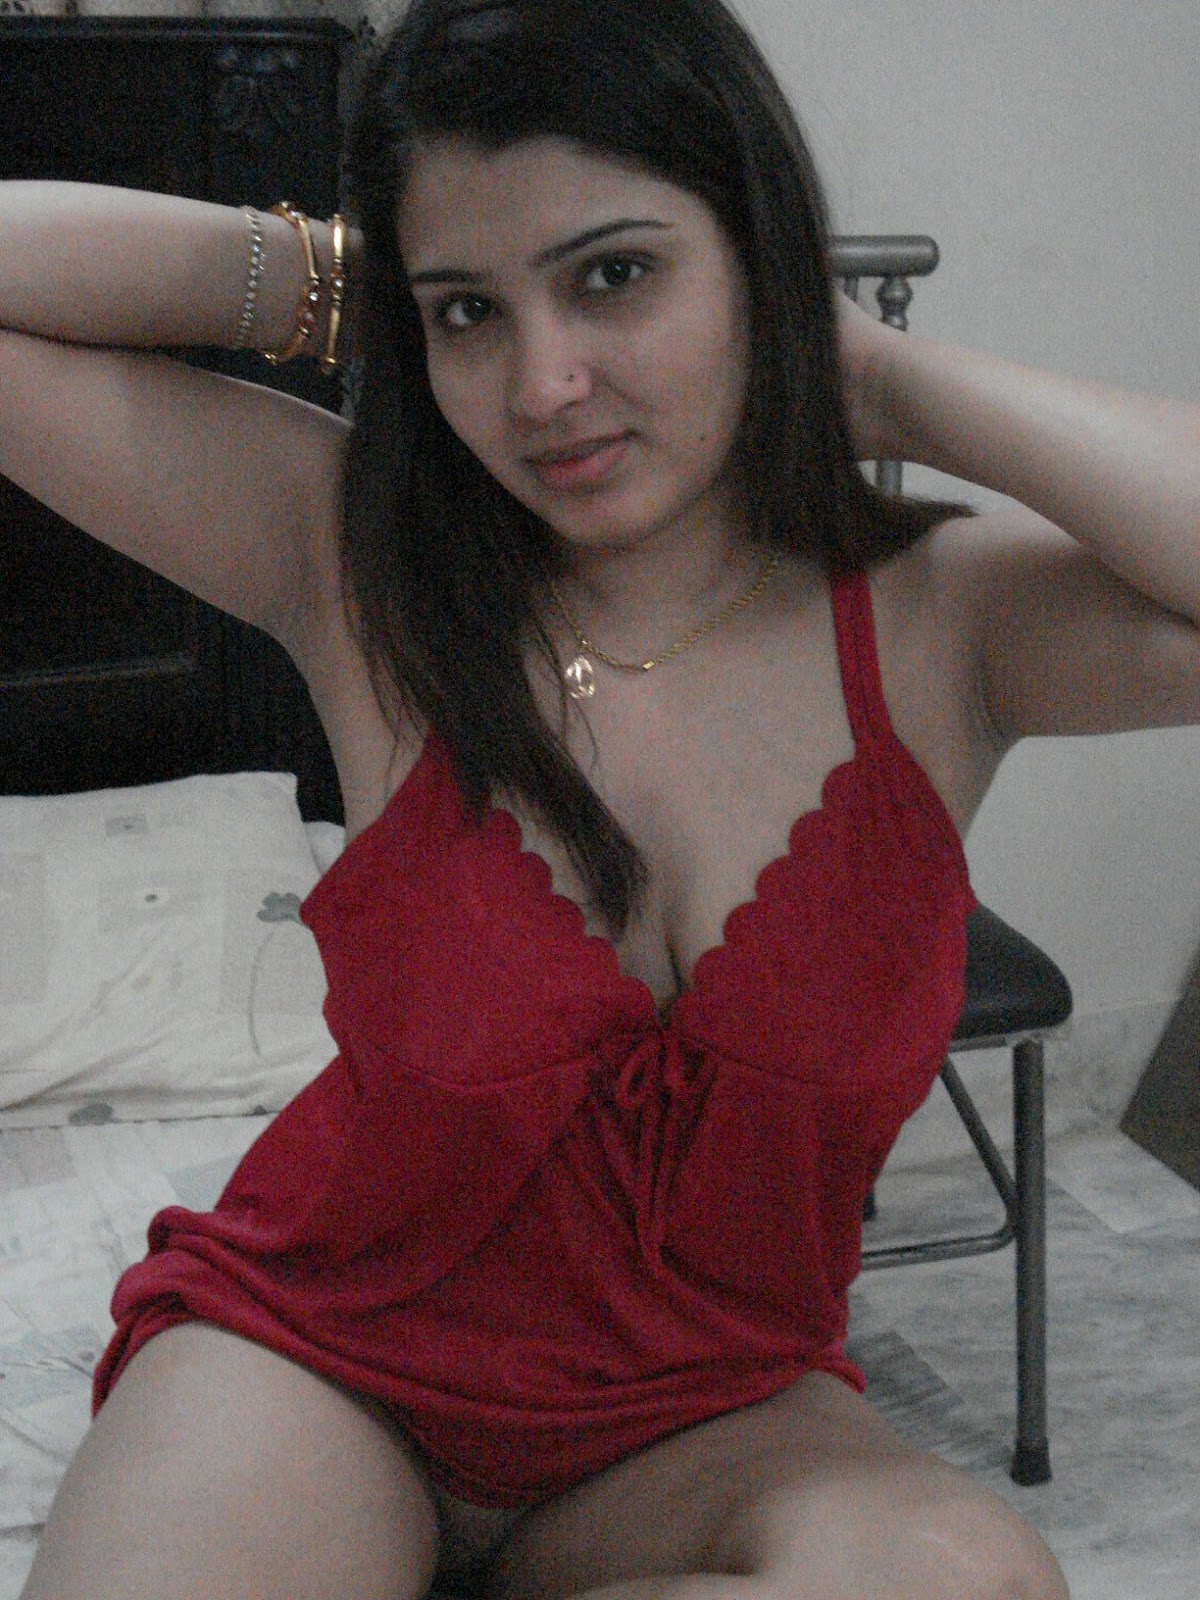 Hot Girls Arena Best Collection Of Hot Pics Hot Girls From Bangalore City Prostitutes